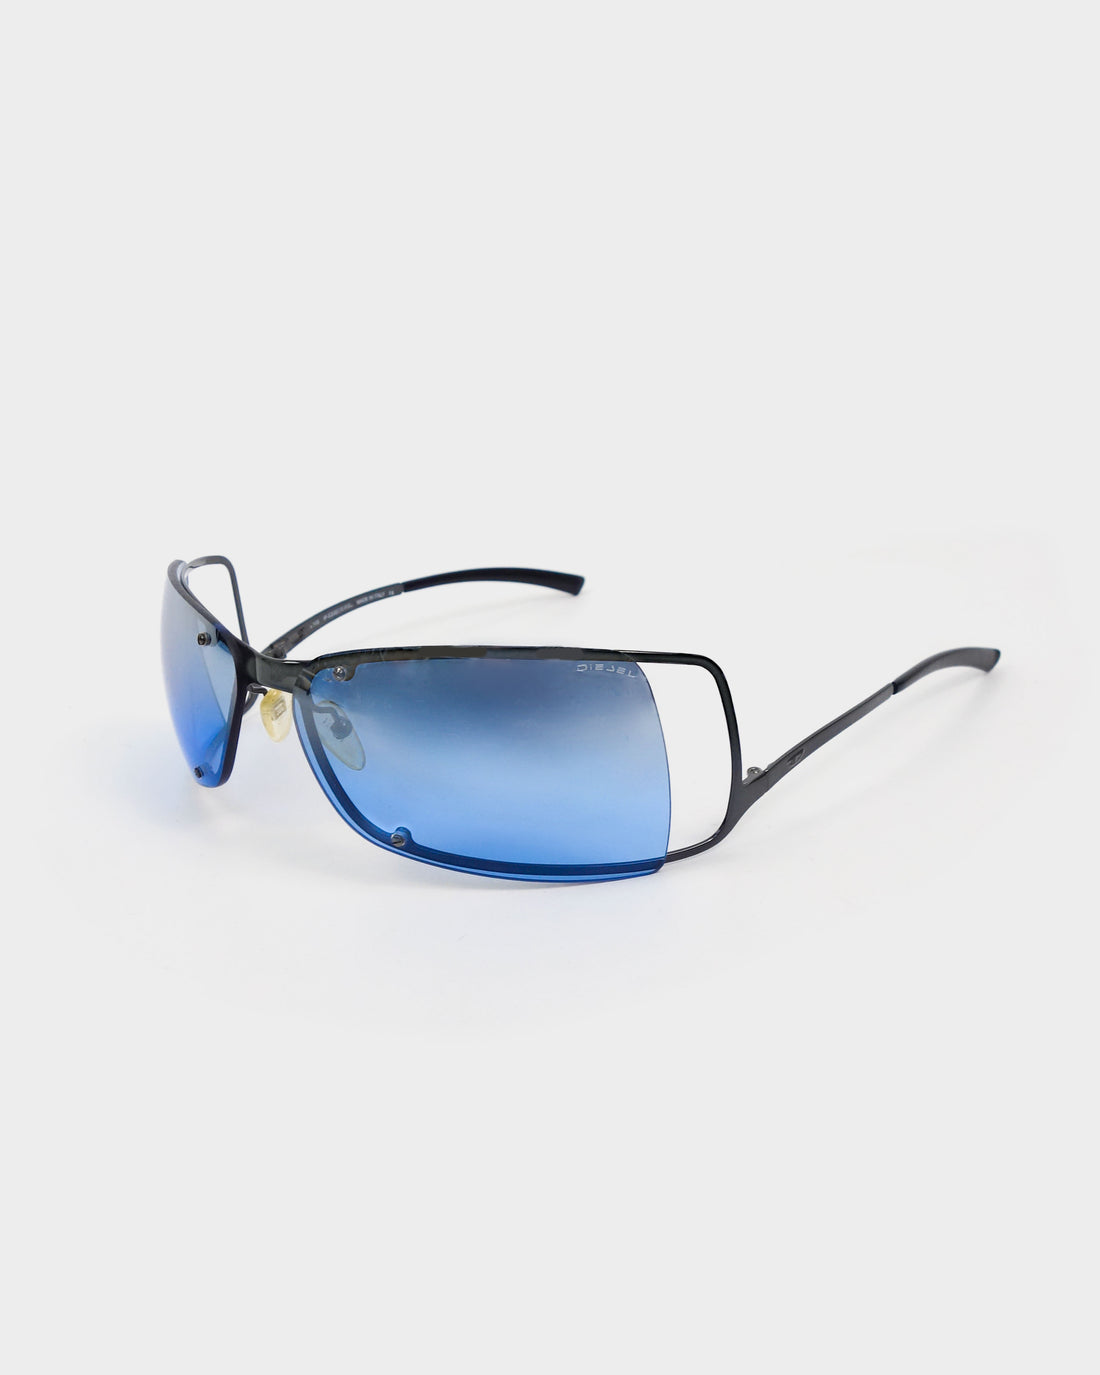 Diesel Cold-Frame Blue Smoked Sunglasses 2000's